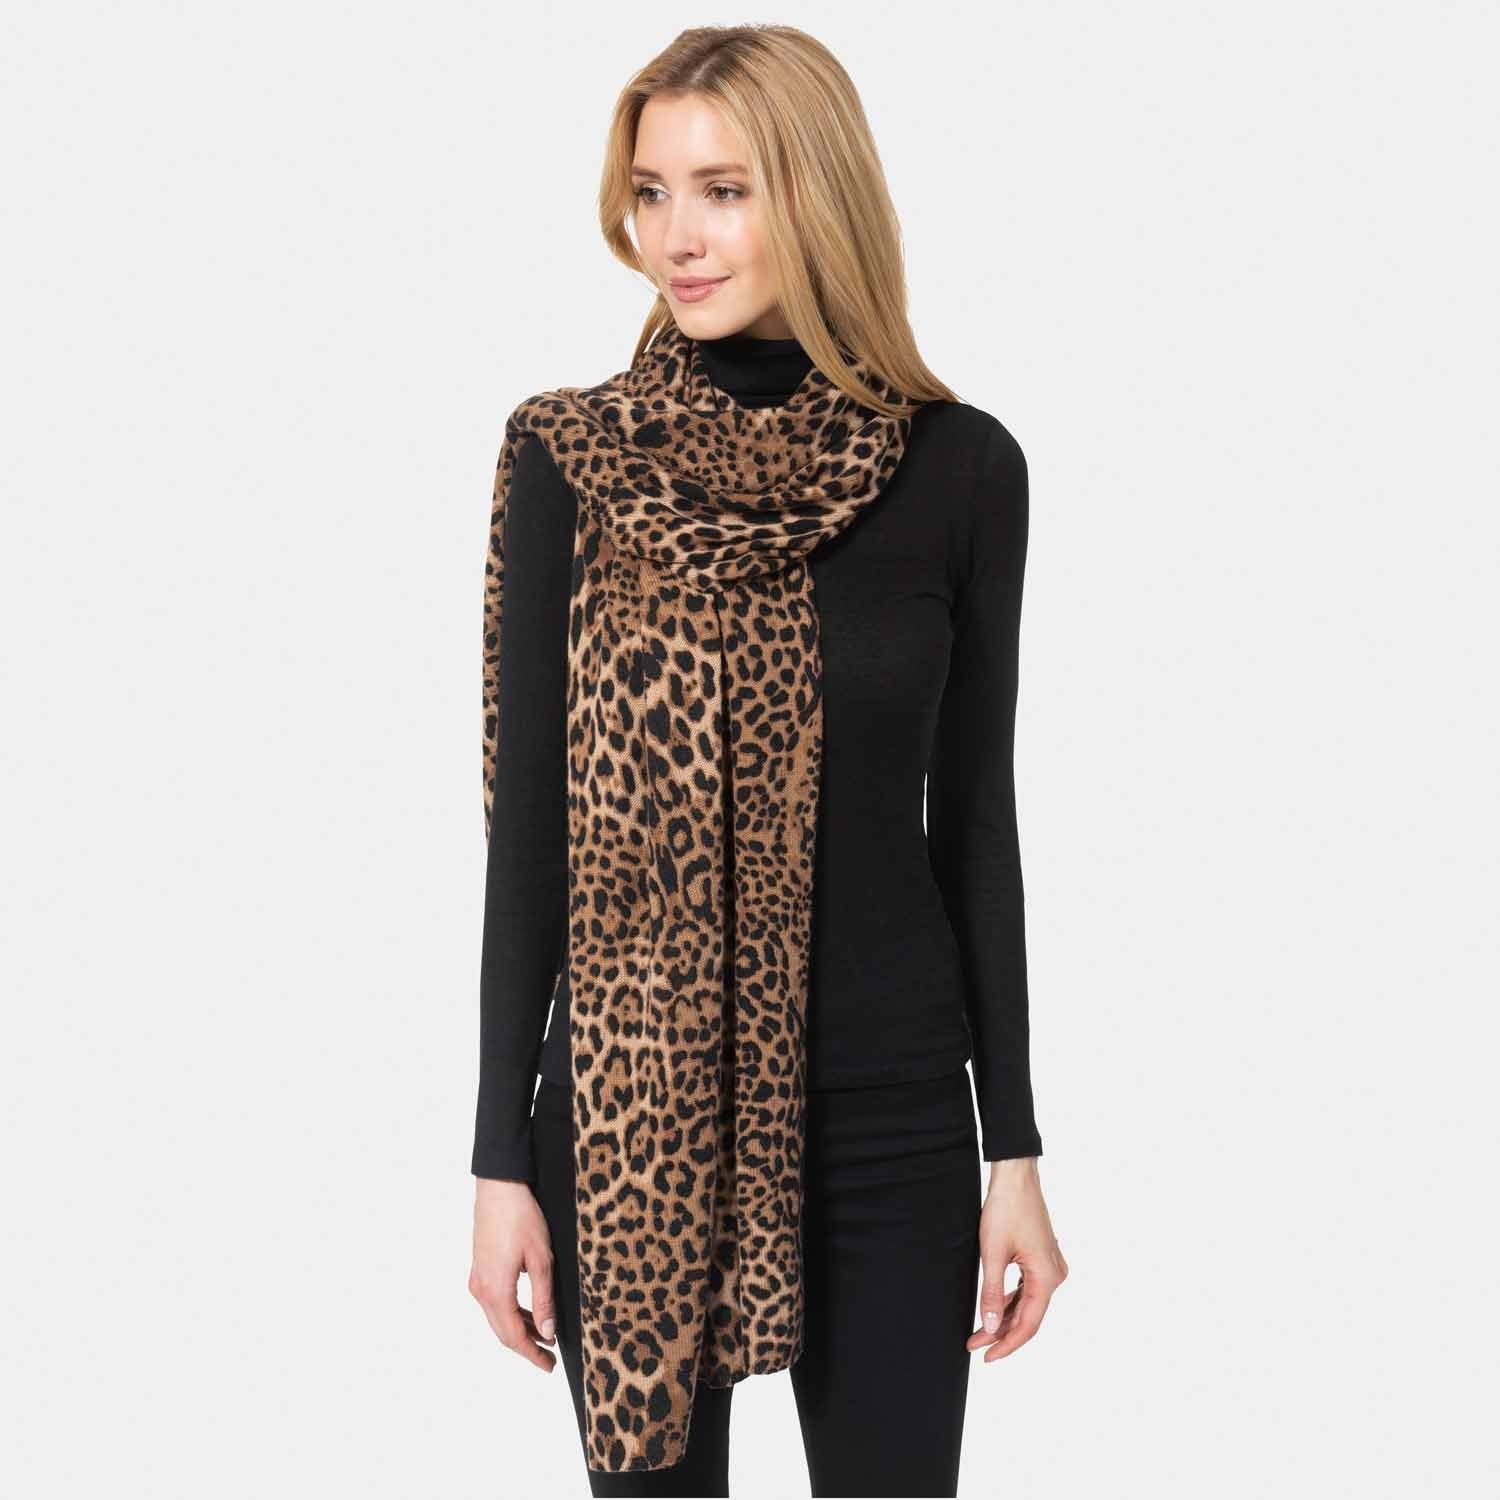 Picture of a woman wearing a knit scarf in cheetah print, camel and black.